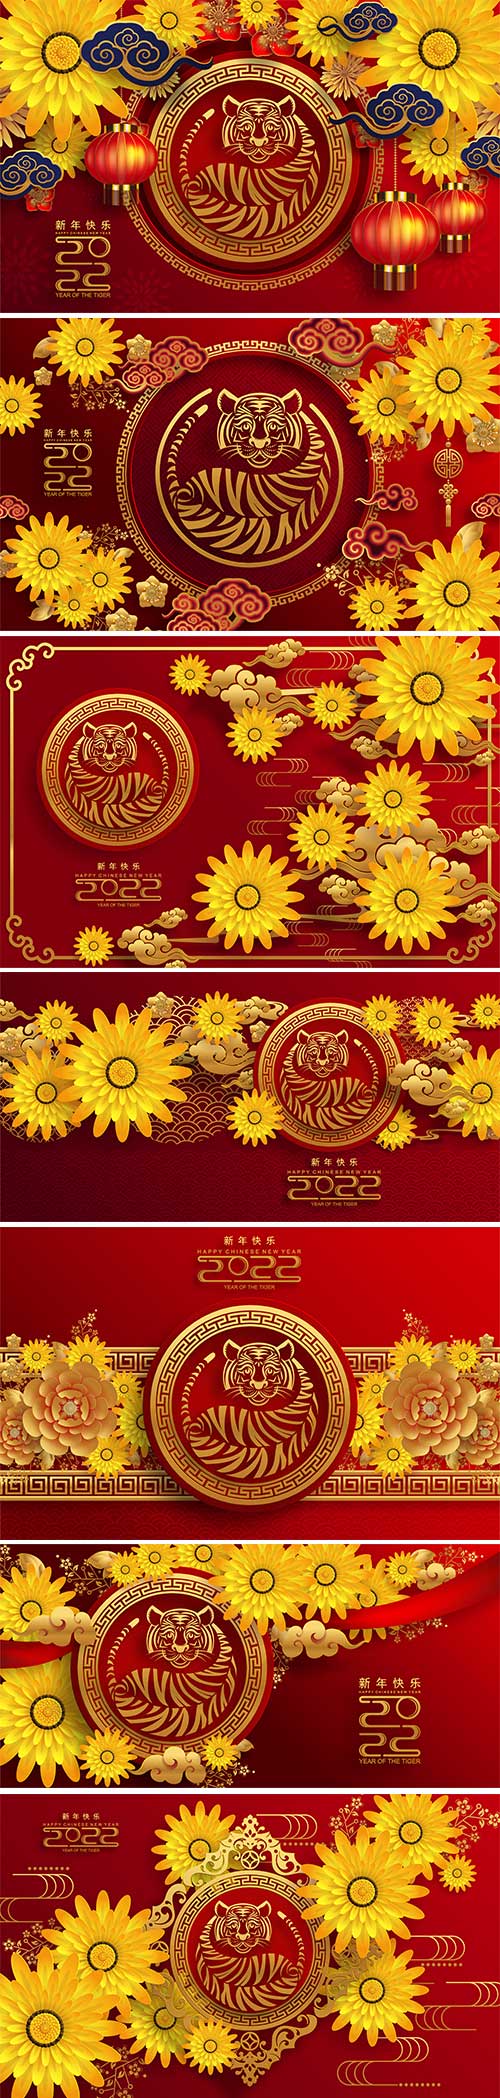 Chinese New Year, illustration with tiger, symbol of 2022, vector texts vol 3